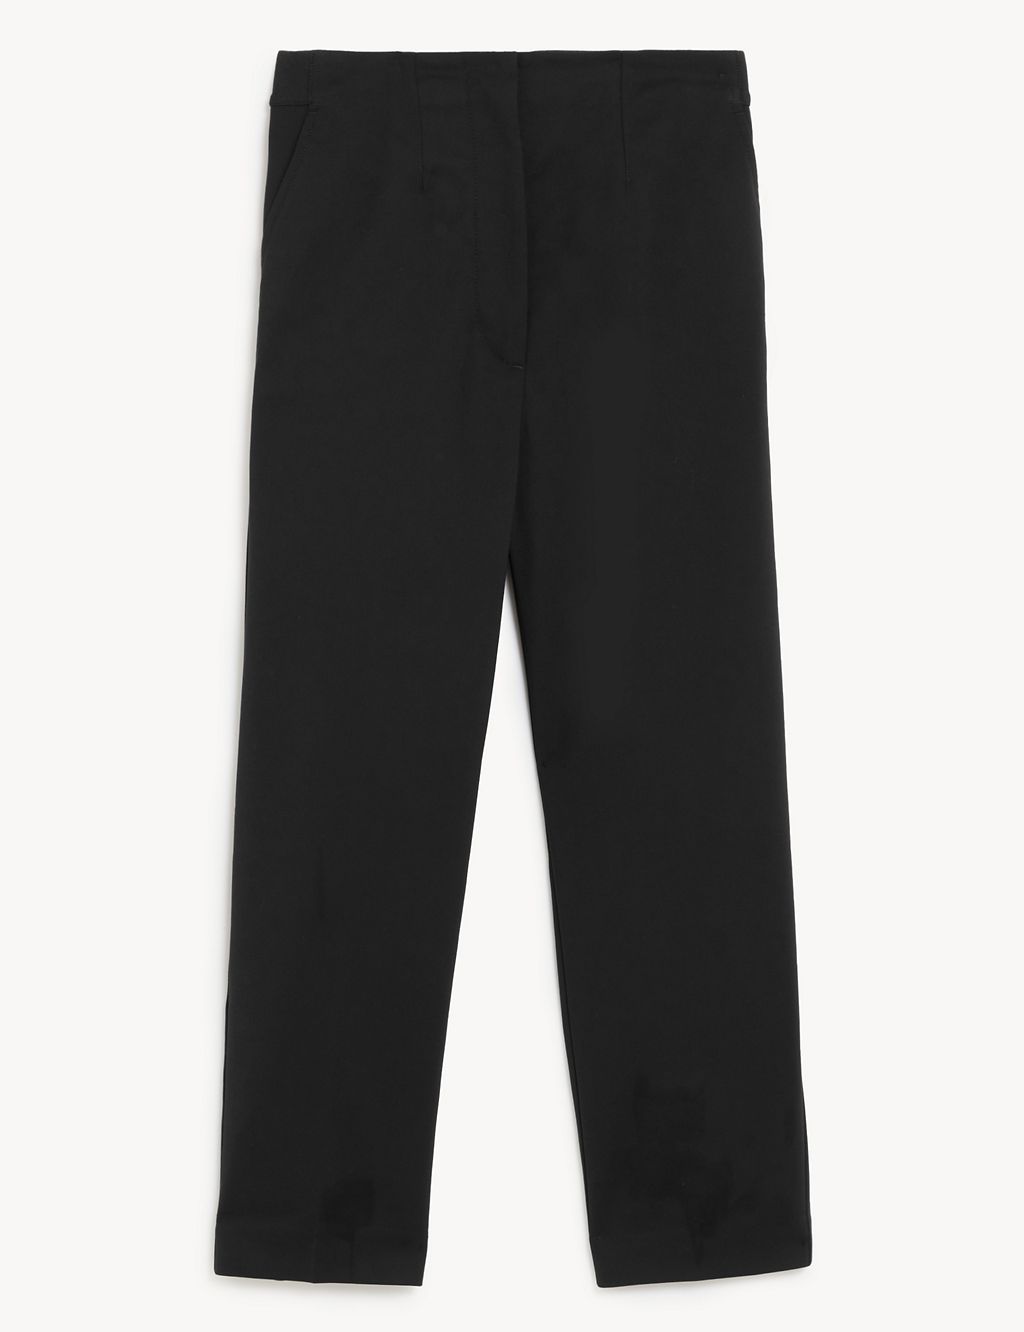 Cotton Blend Slim Fit Cropped Trousers | M&S Collection | M&S